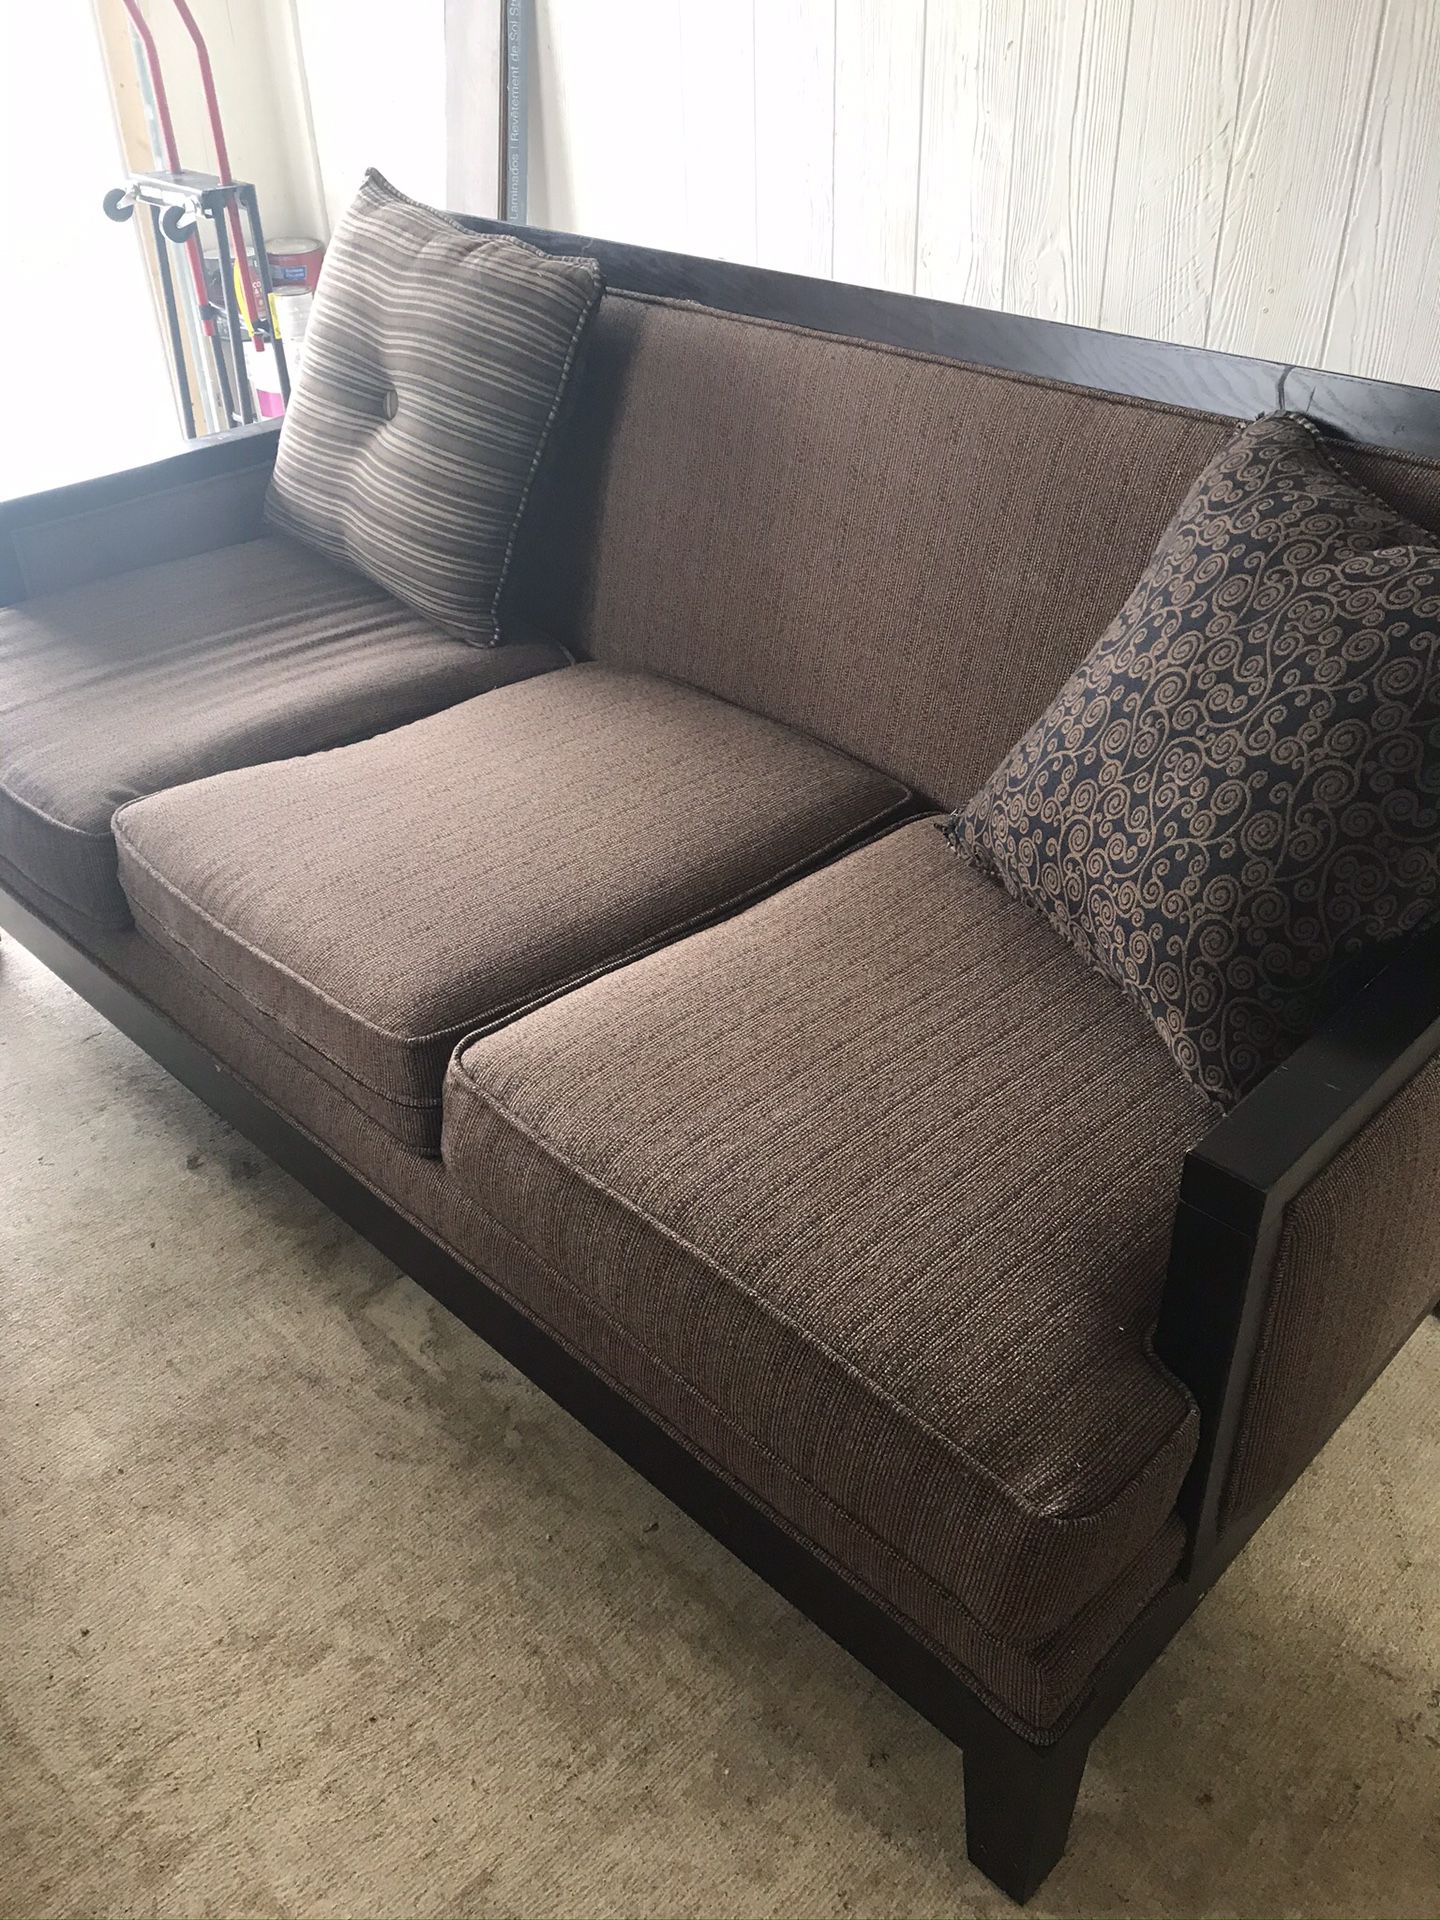 Thomasville couch